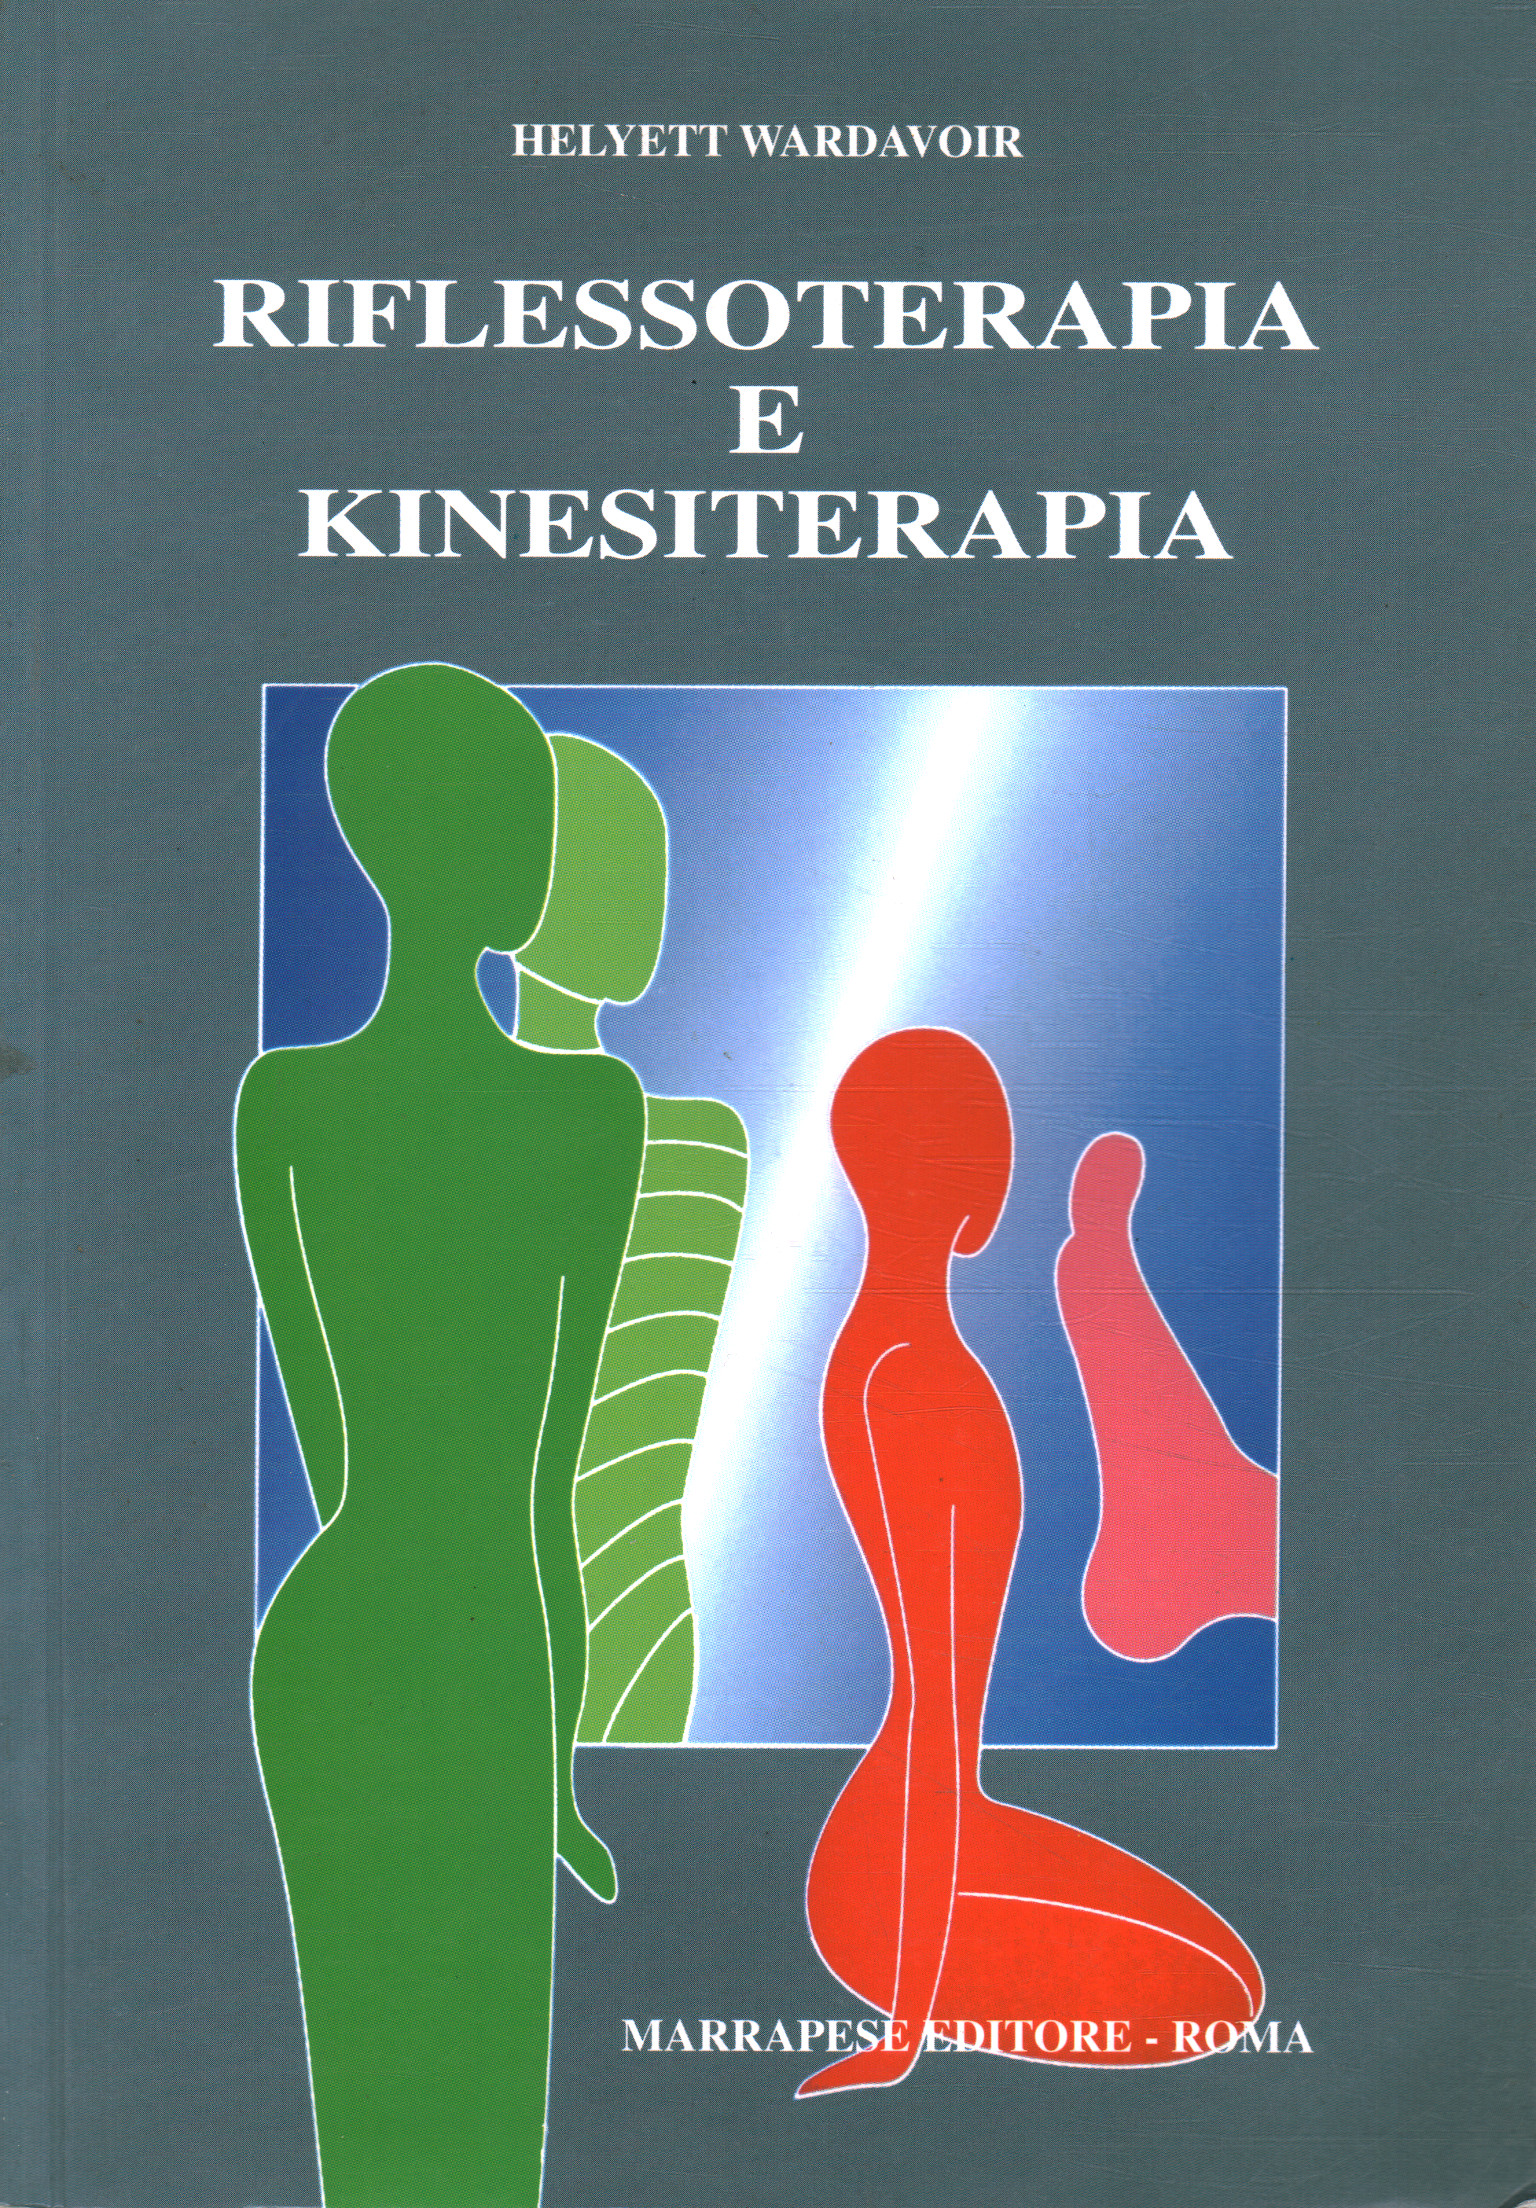 Reflexotherapy and kinesitherapy